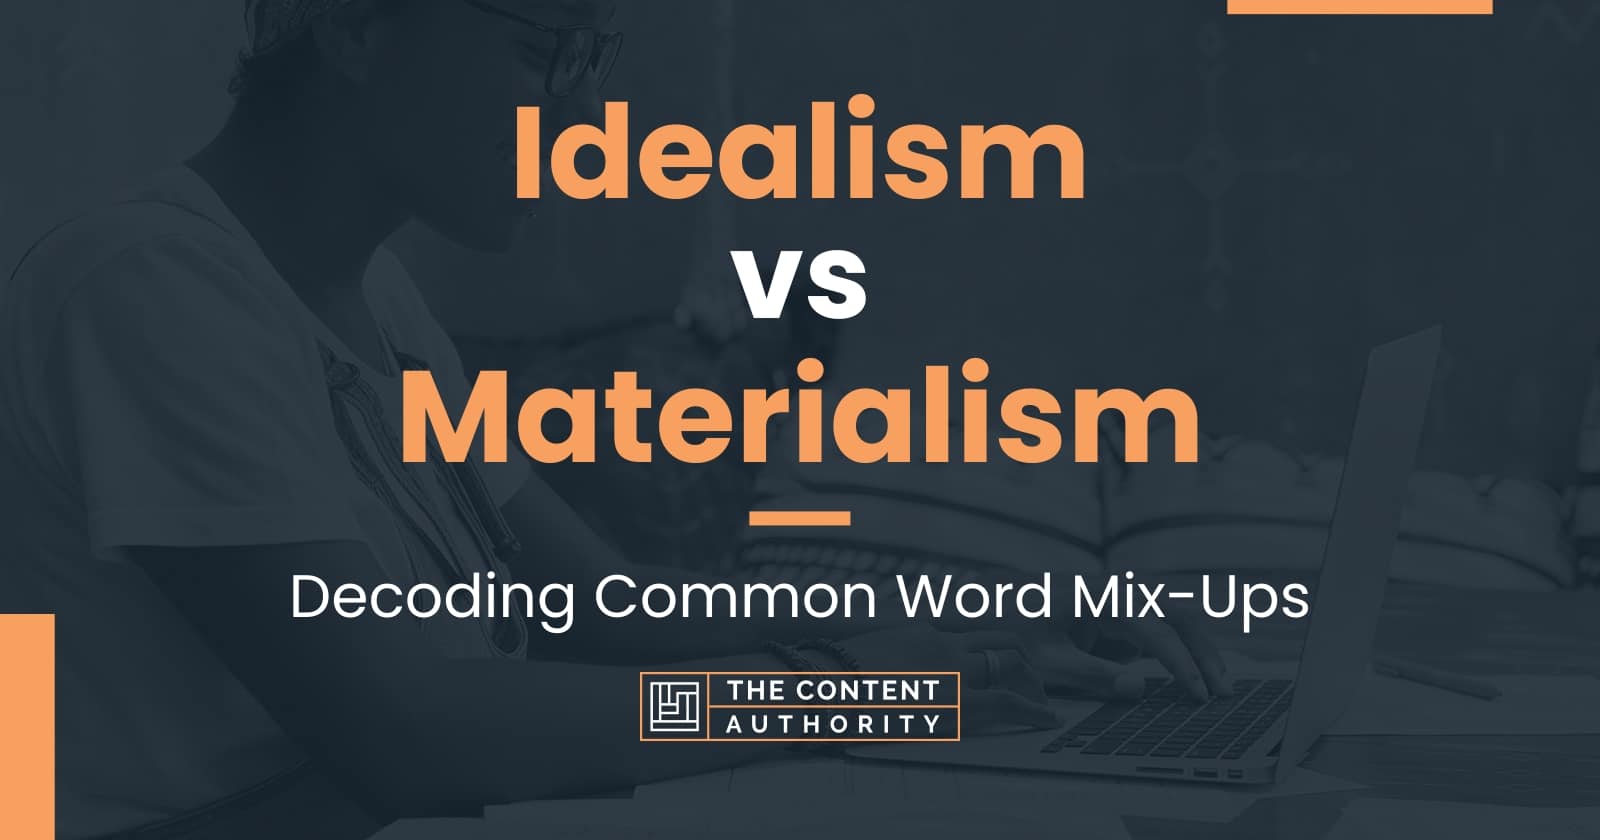 Idealism vs Materialism: Decoding Common Word Mix-Ups